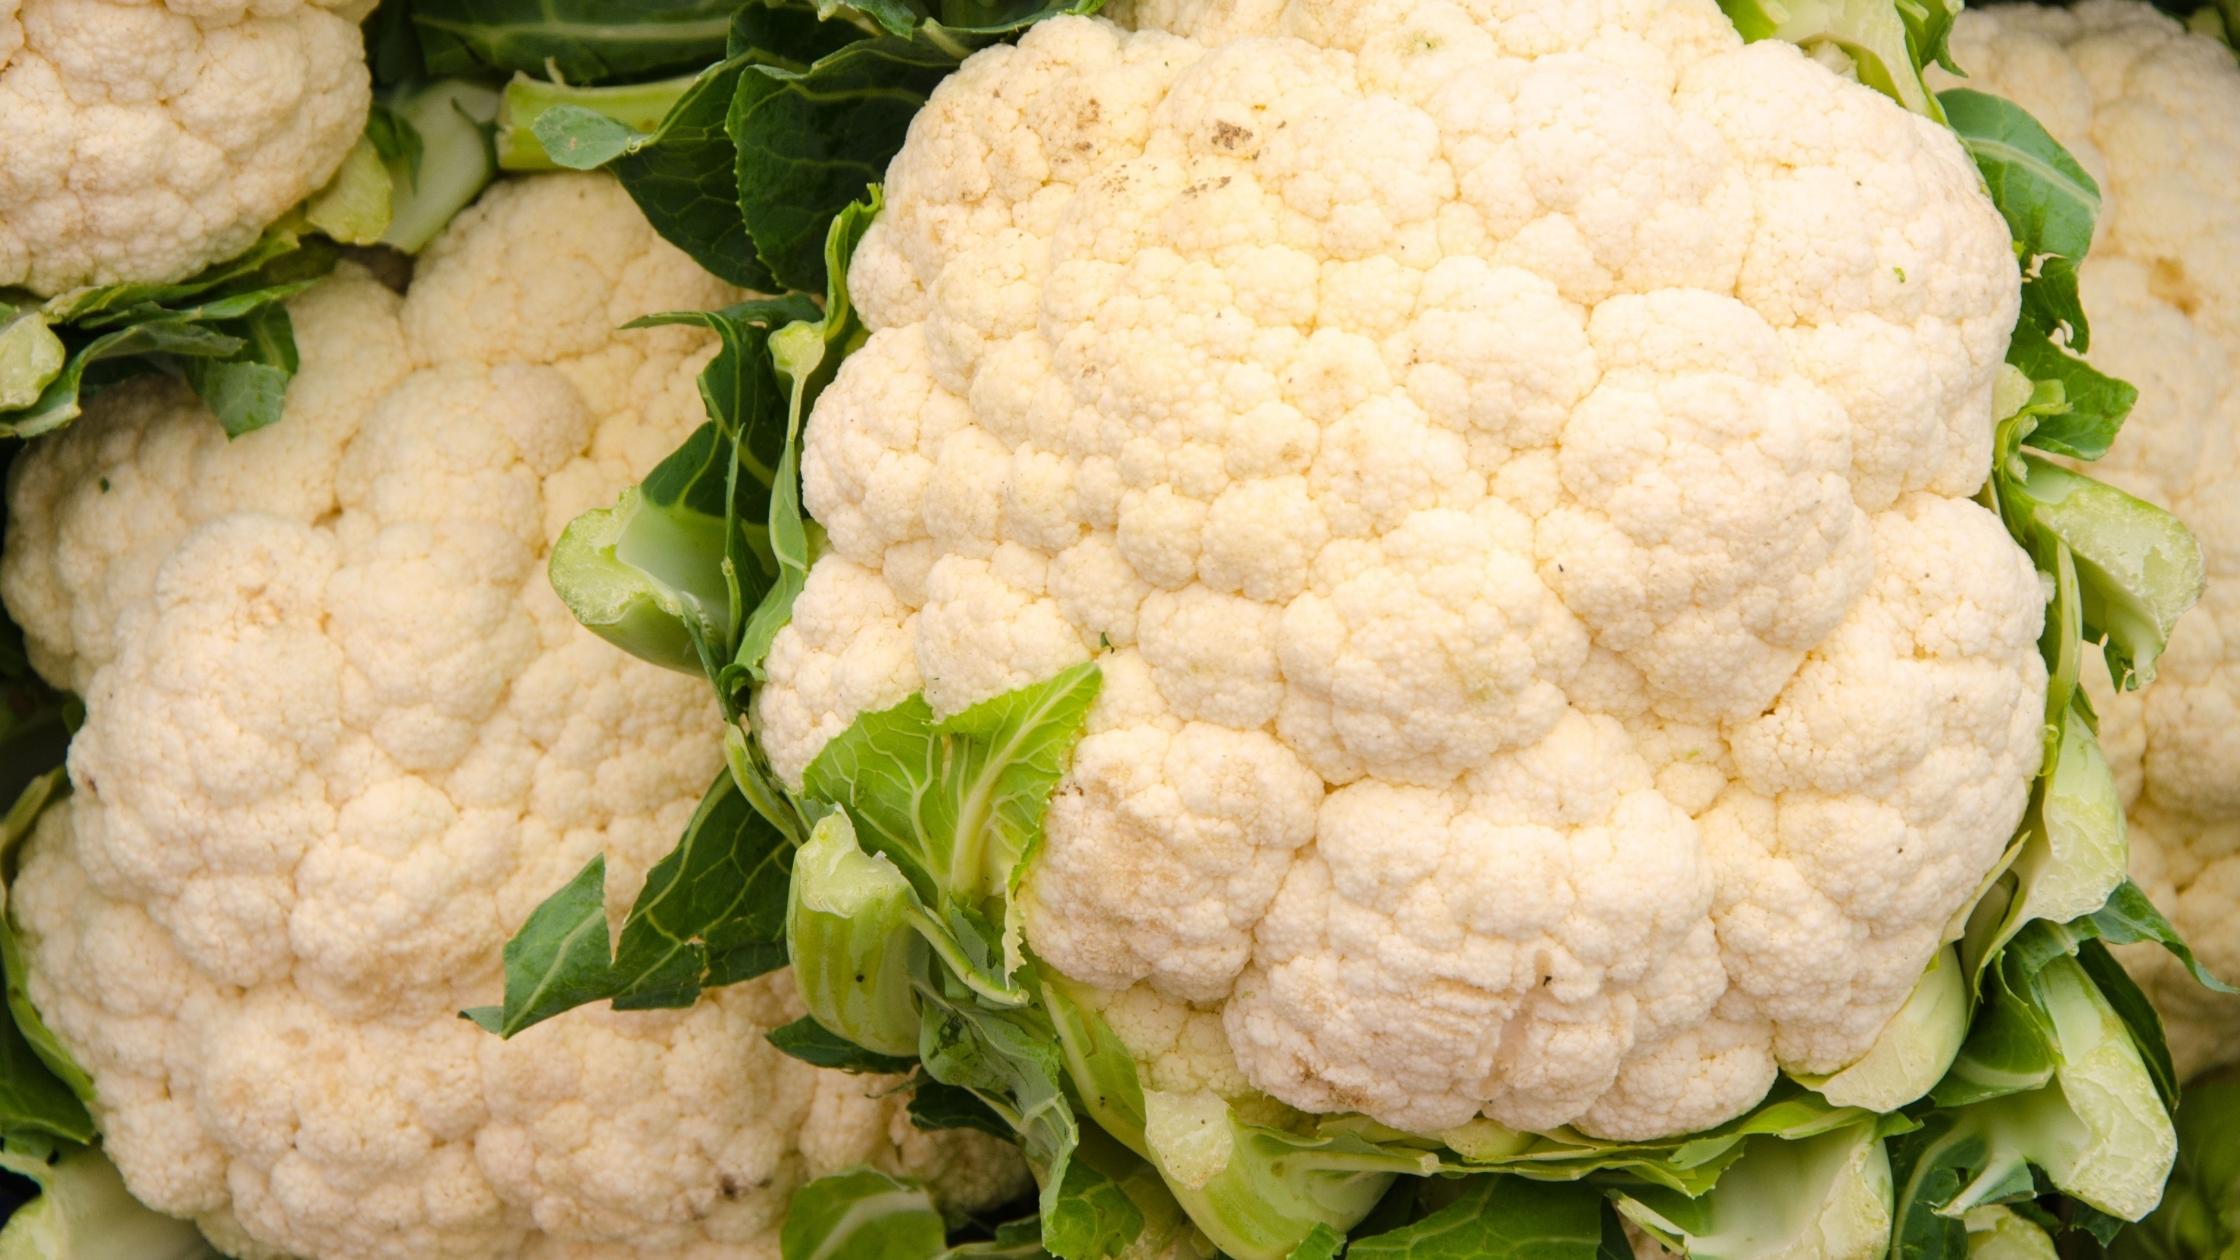 Restaurants, please stop calling mushrooms and cauliflower a protein